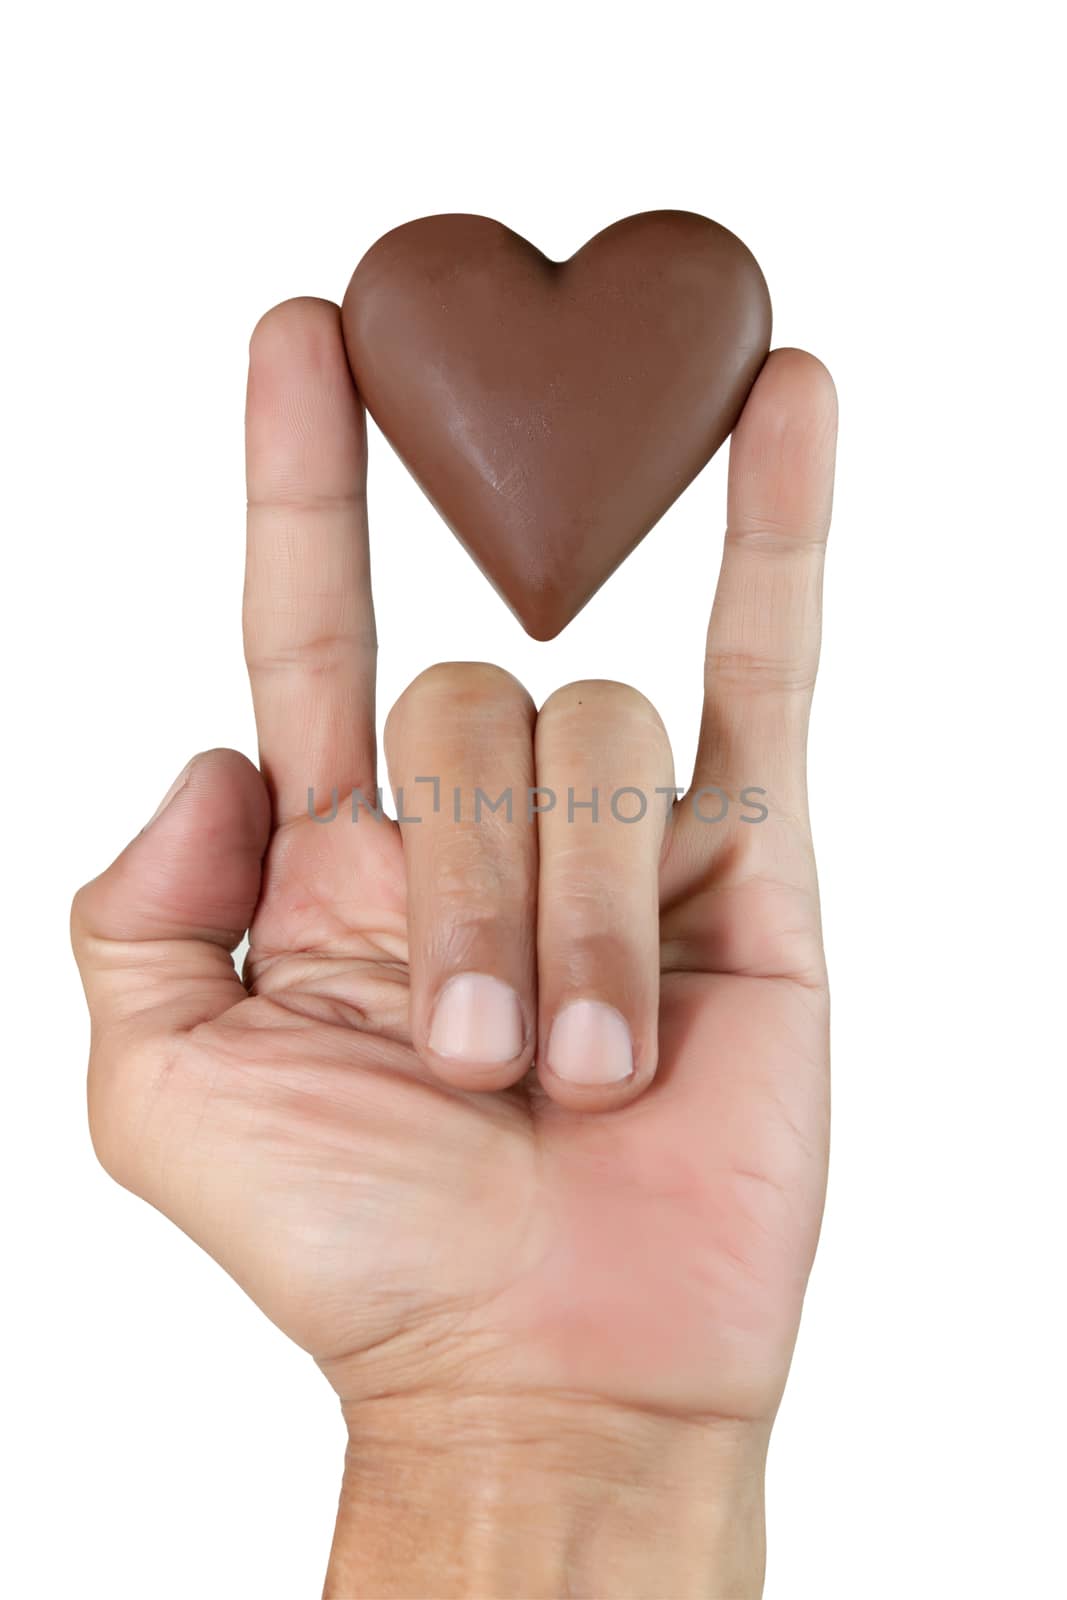 male hand showing Sign language means that I Love you and chocolate heart shape. Isolated on white with work paths.